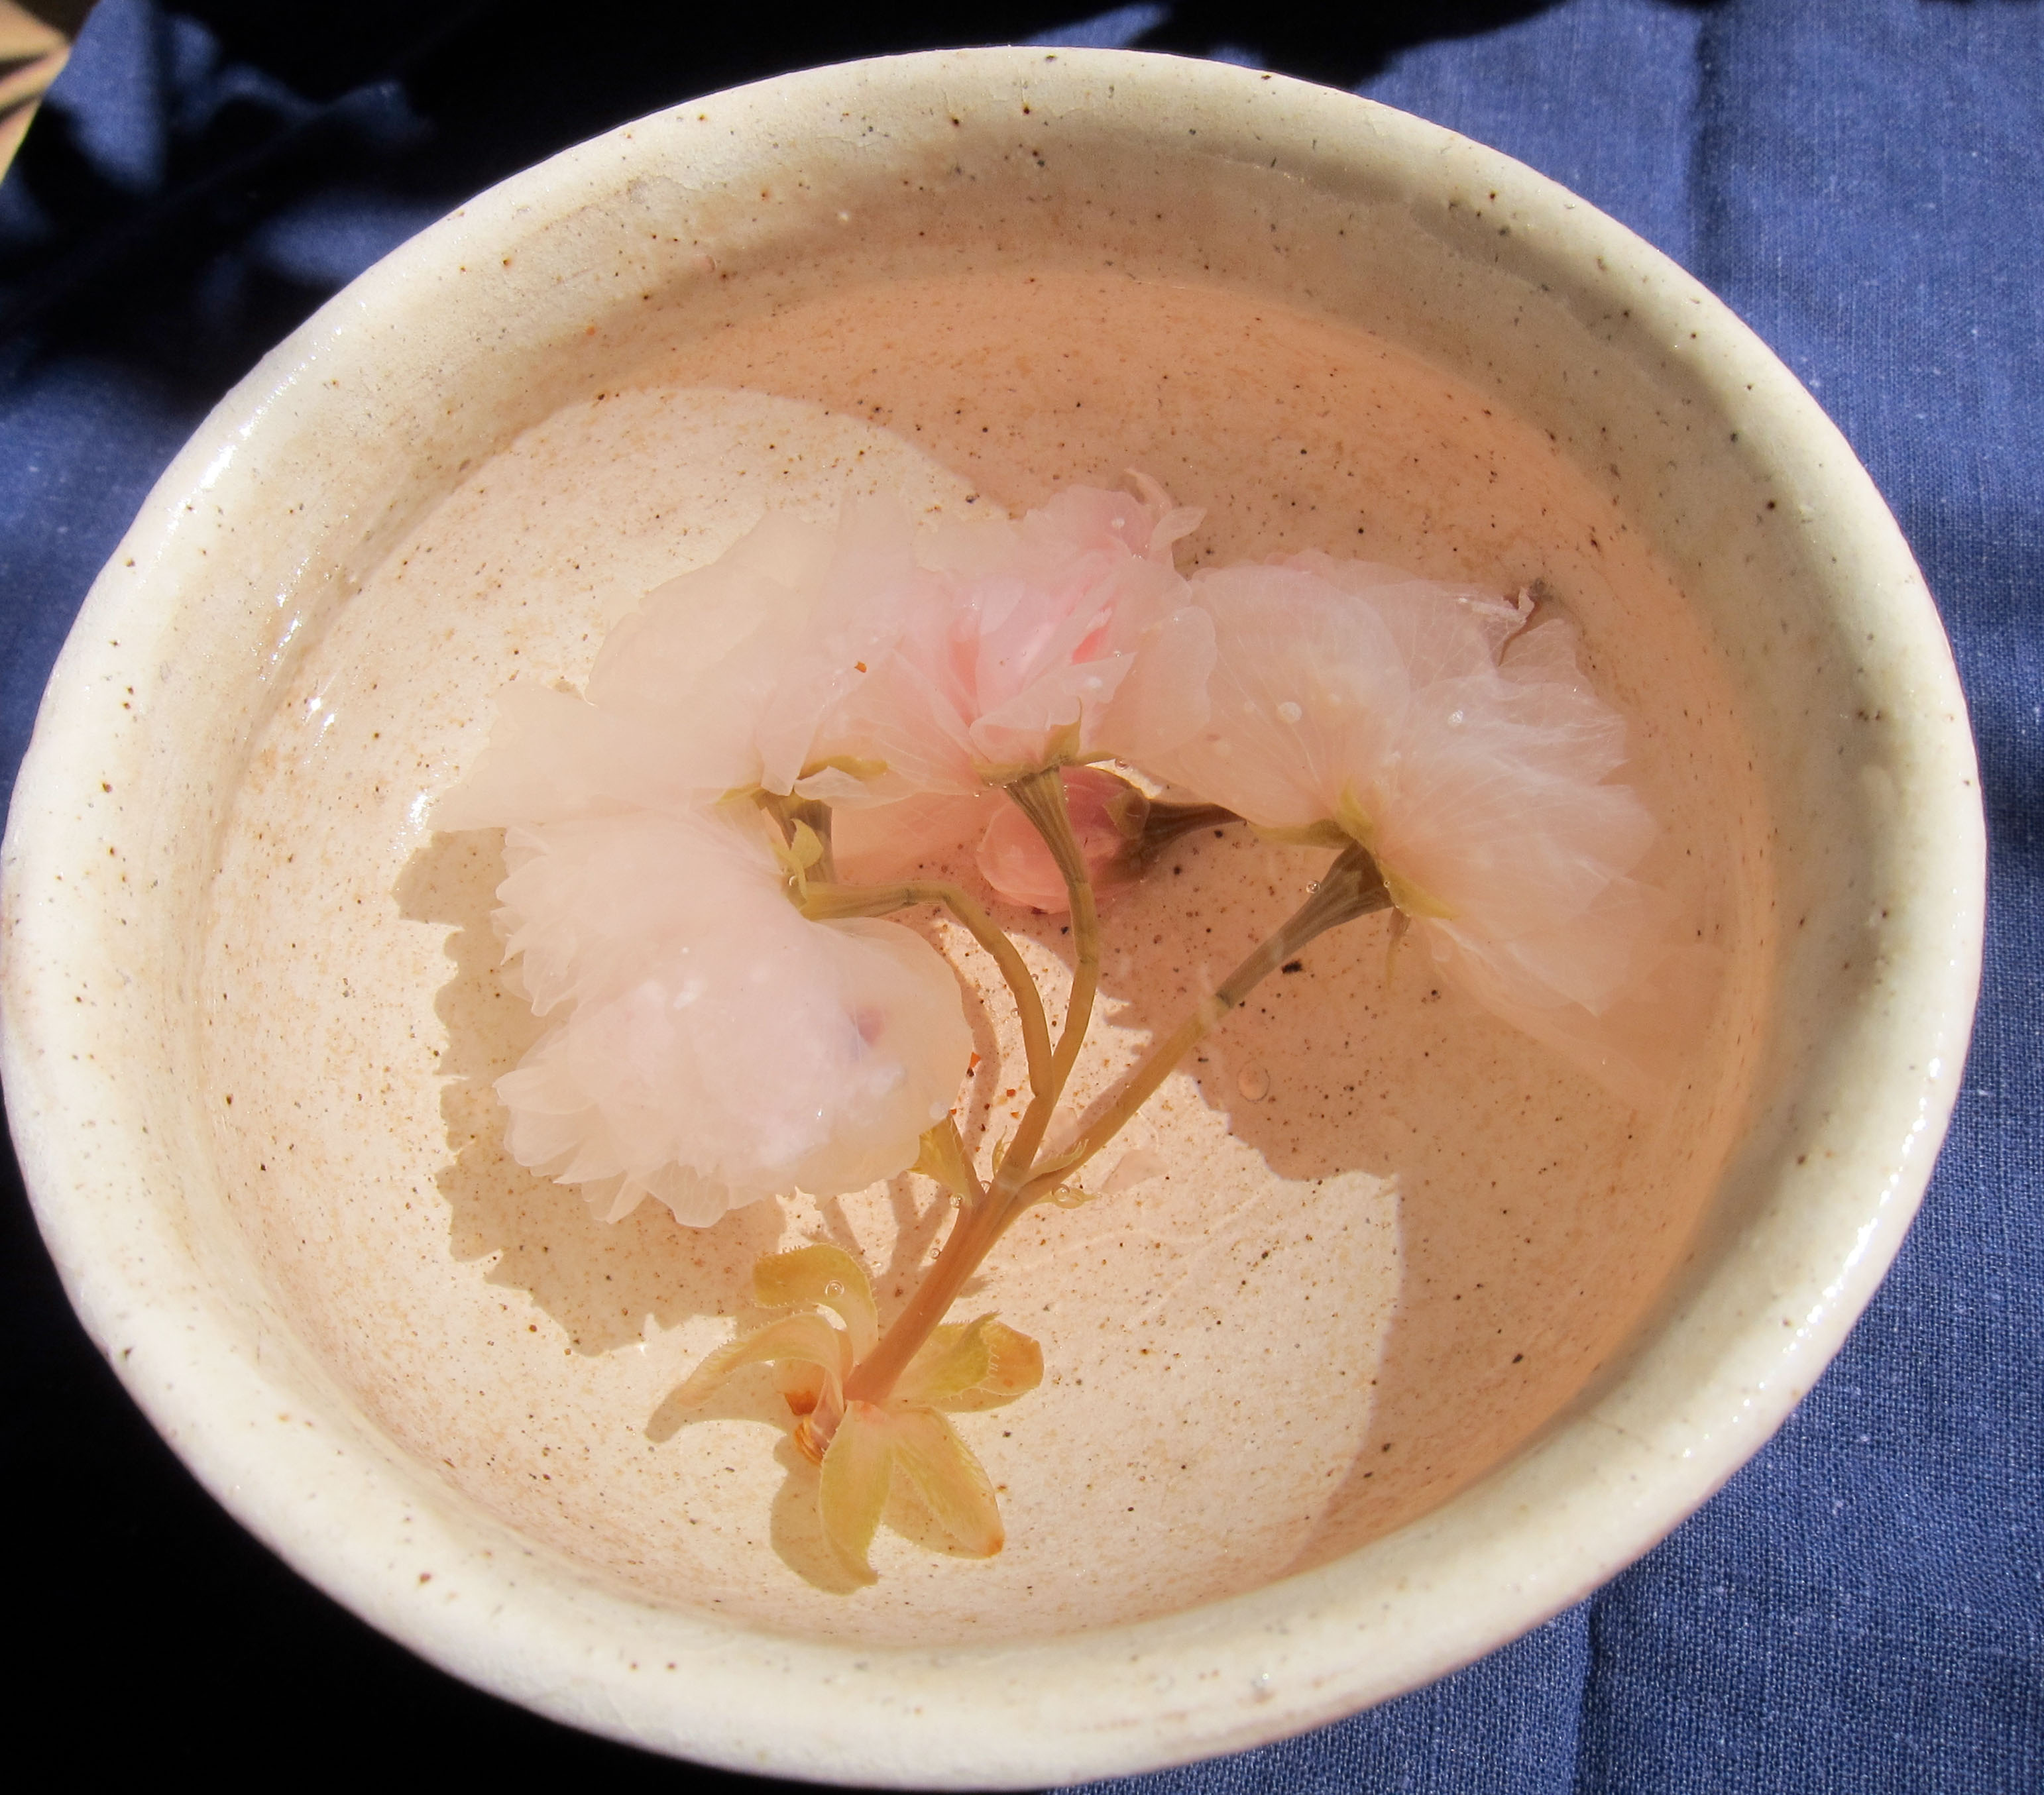 April cherry blossom tea is slightly salty and looks like a fairytale beverage